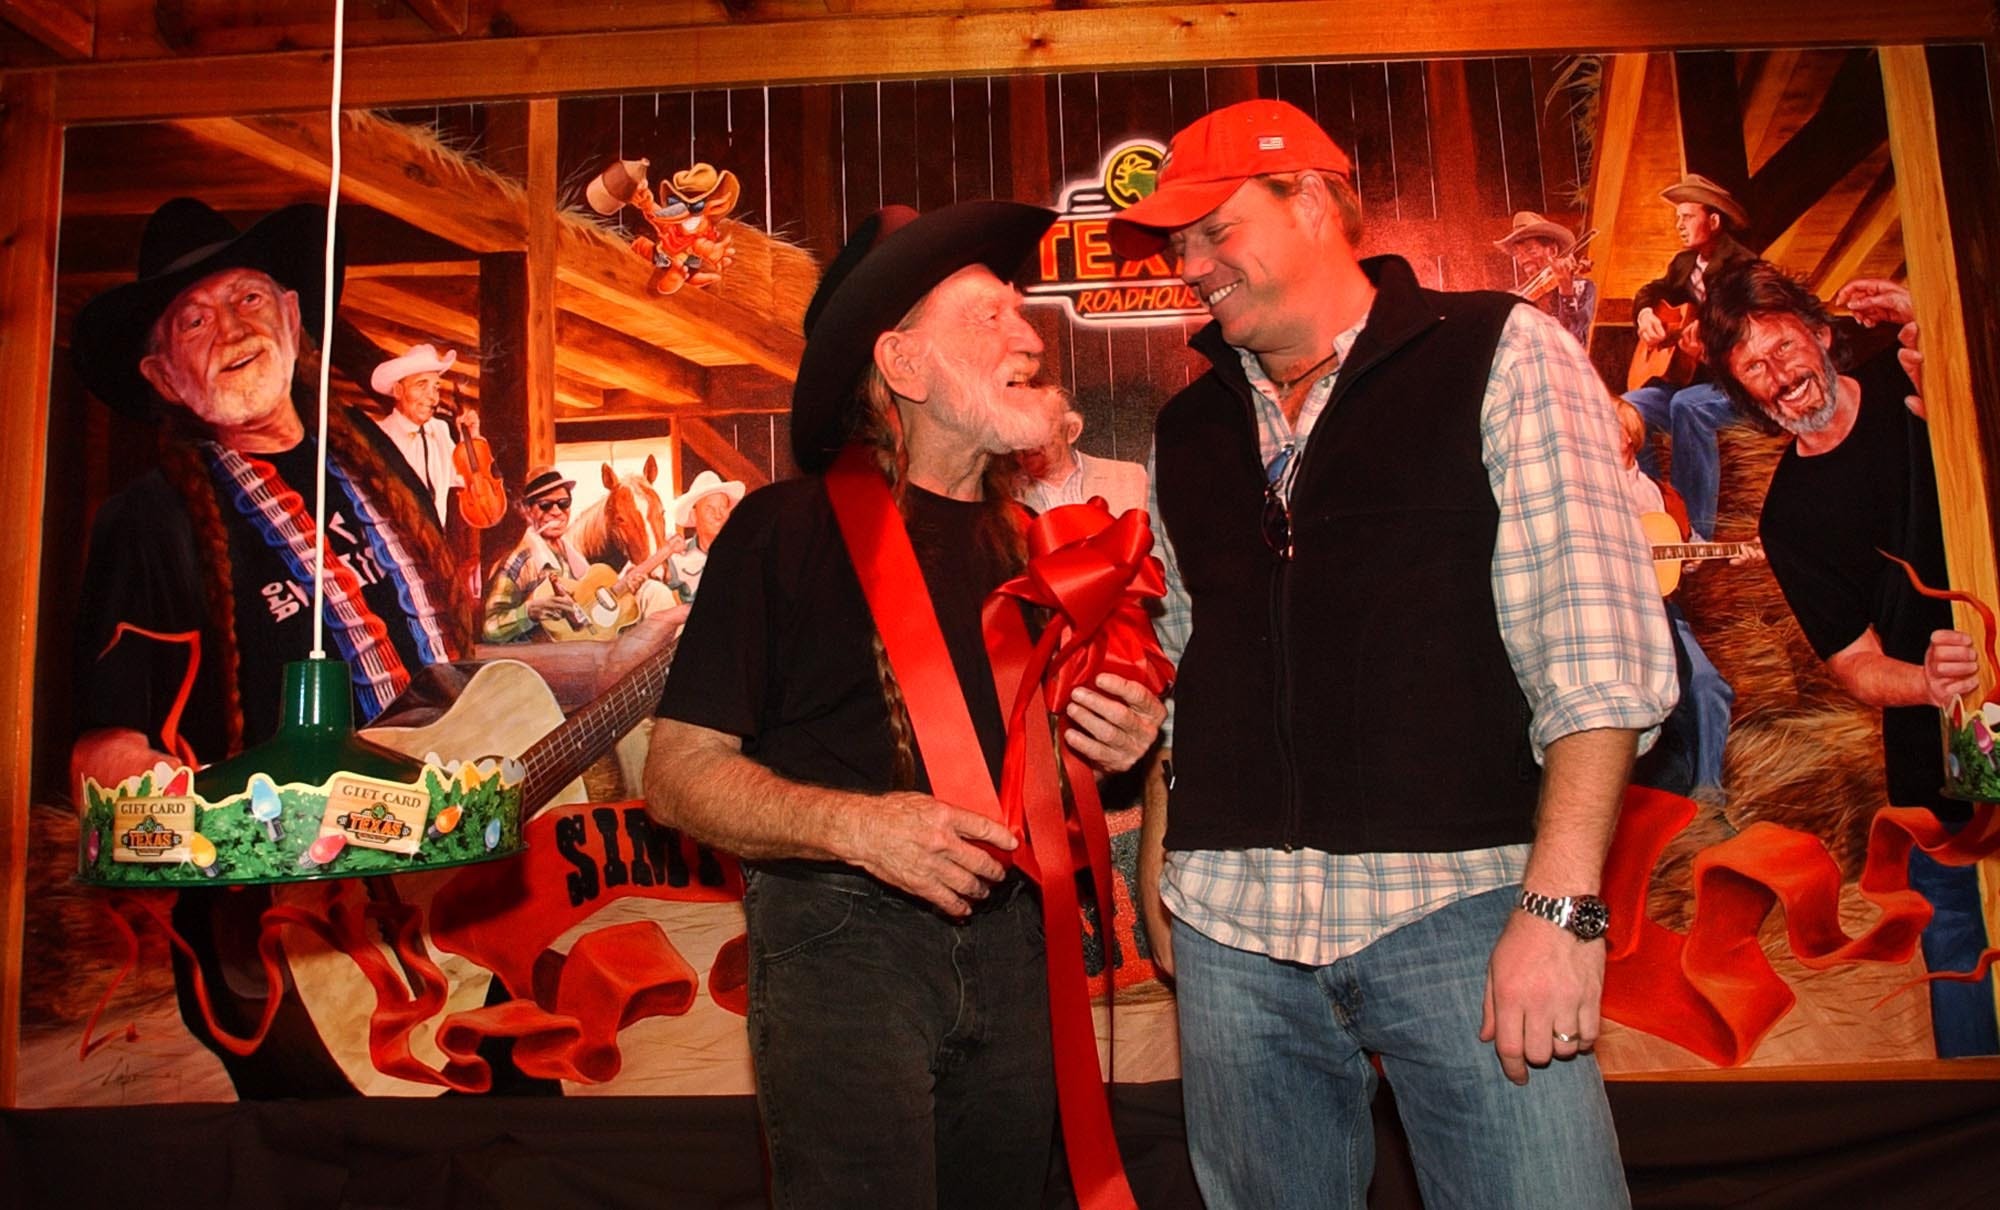 Country music legend Willie Nelson (left) and singer Pat Green visit in front a a mural of country superstars (Green is not in the mural) at the grand opening of Willie Nelson's Texas Roadhouse restaurant on Thursday Dec. 16, 2004.  The mural was created by David Carter.